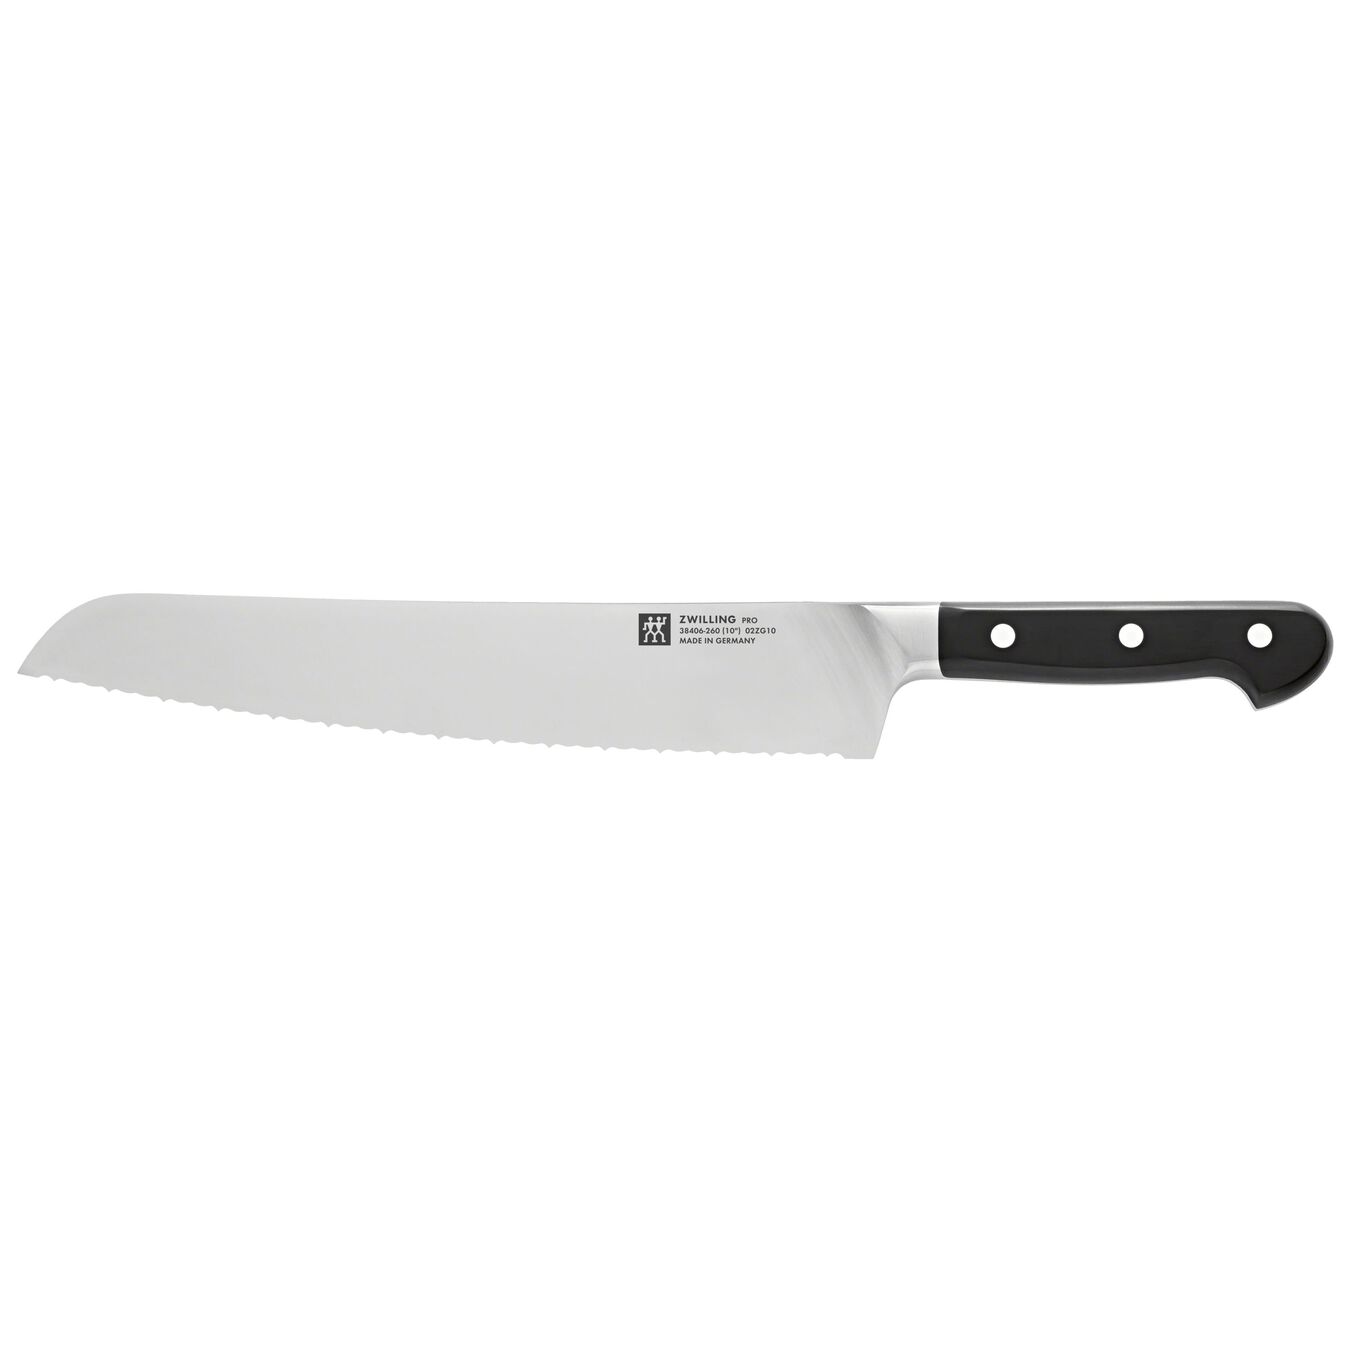 10-inch, Ultimate Bread Knife,,large 1